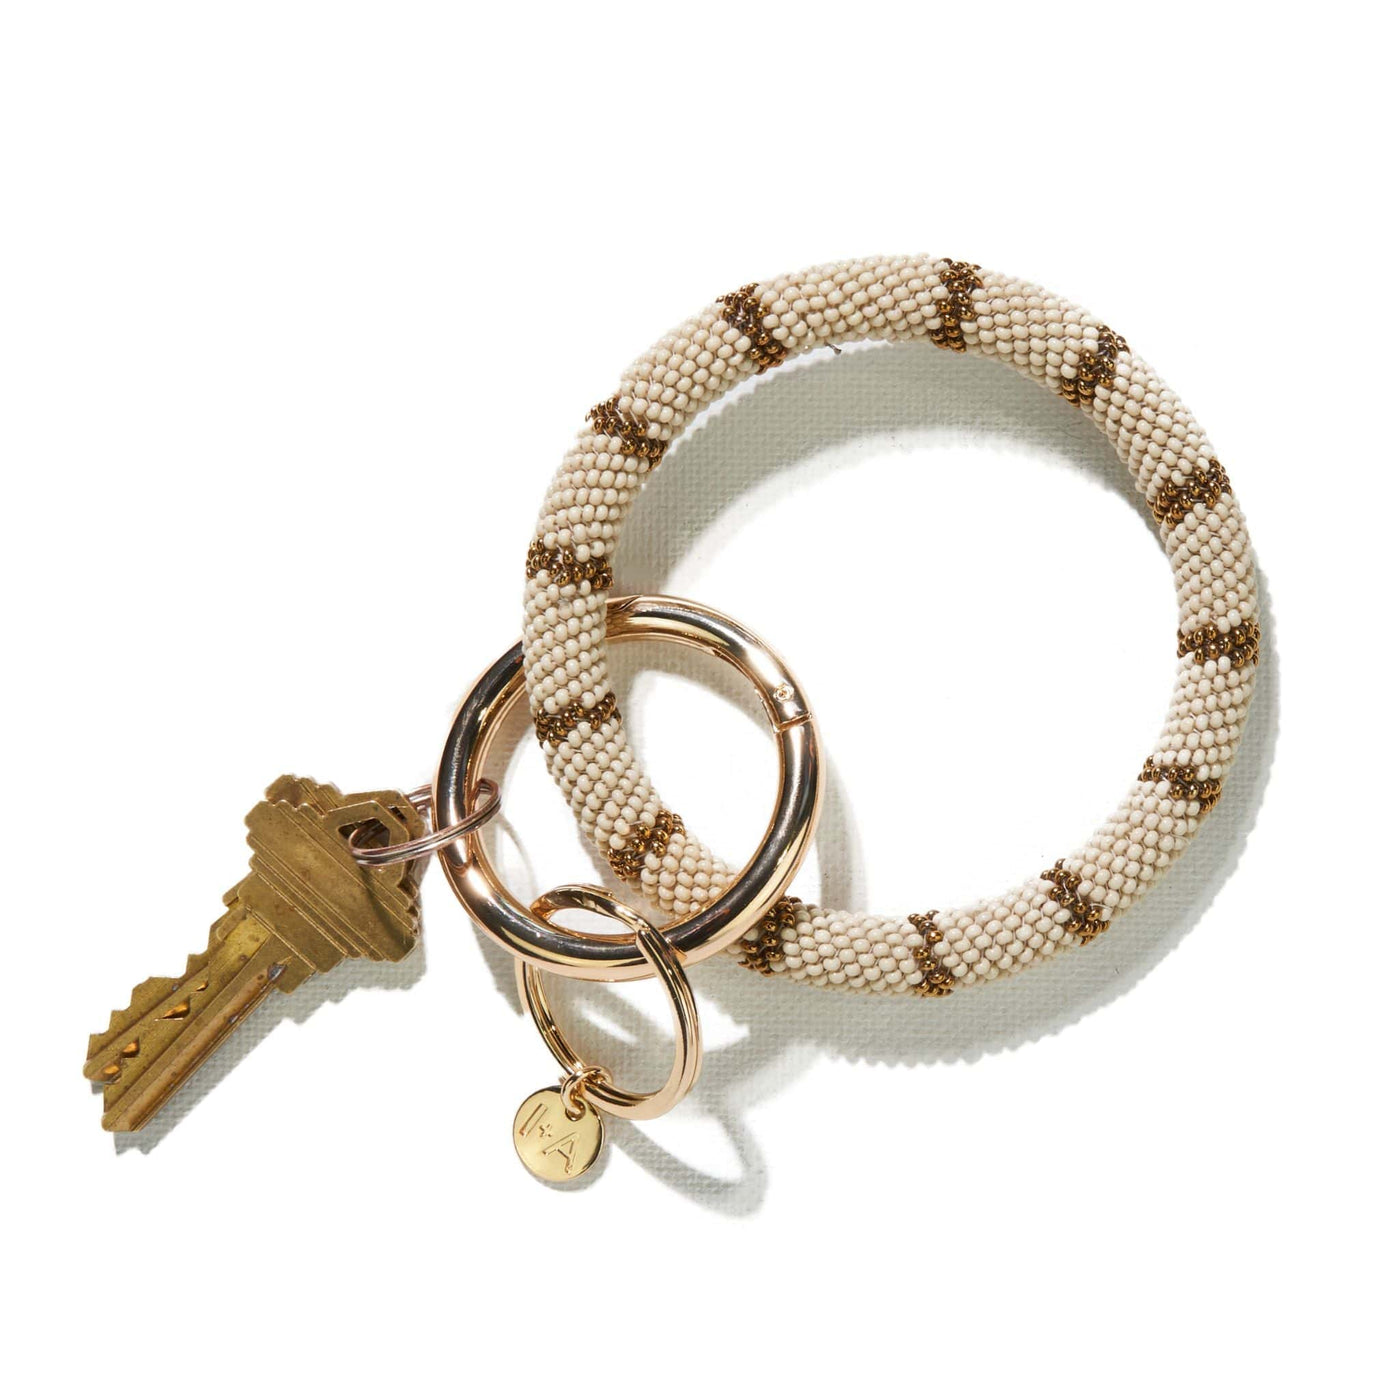 Chloe Key Ring in cream and gold, front view.